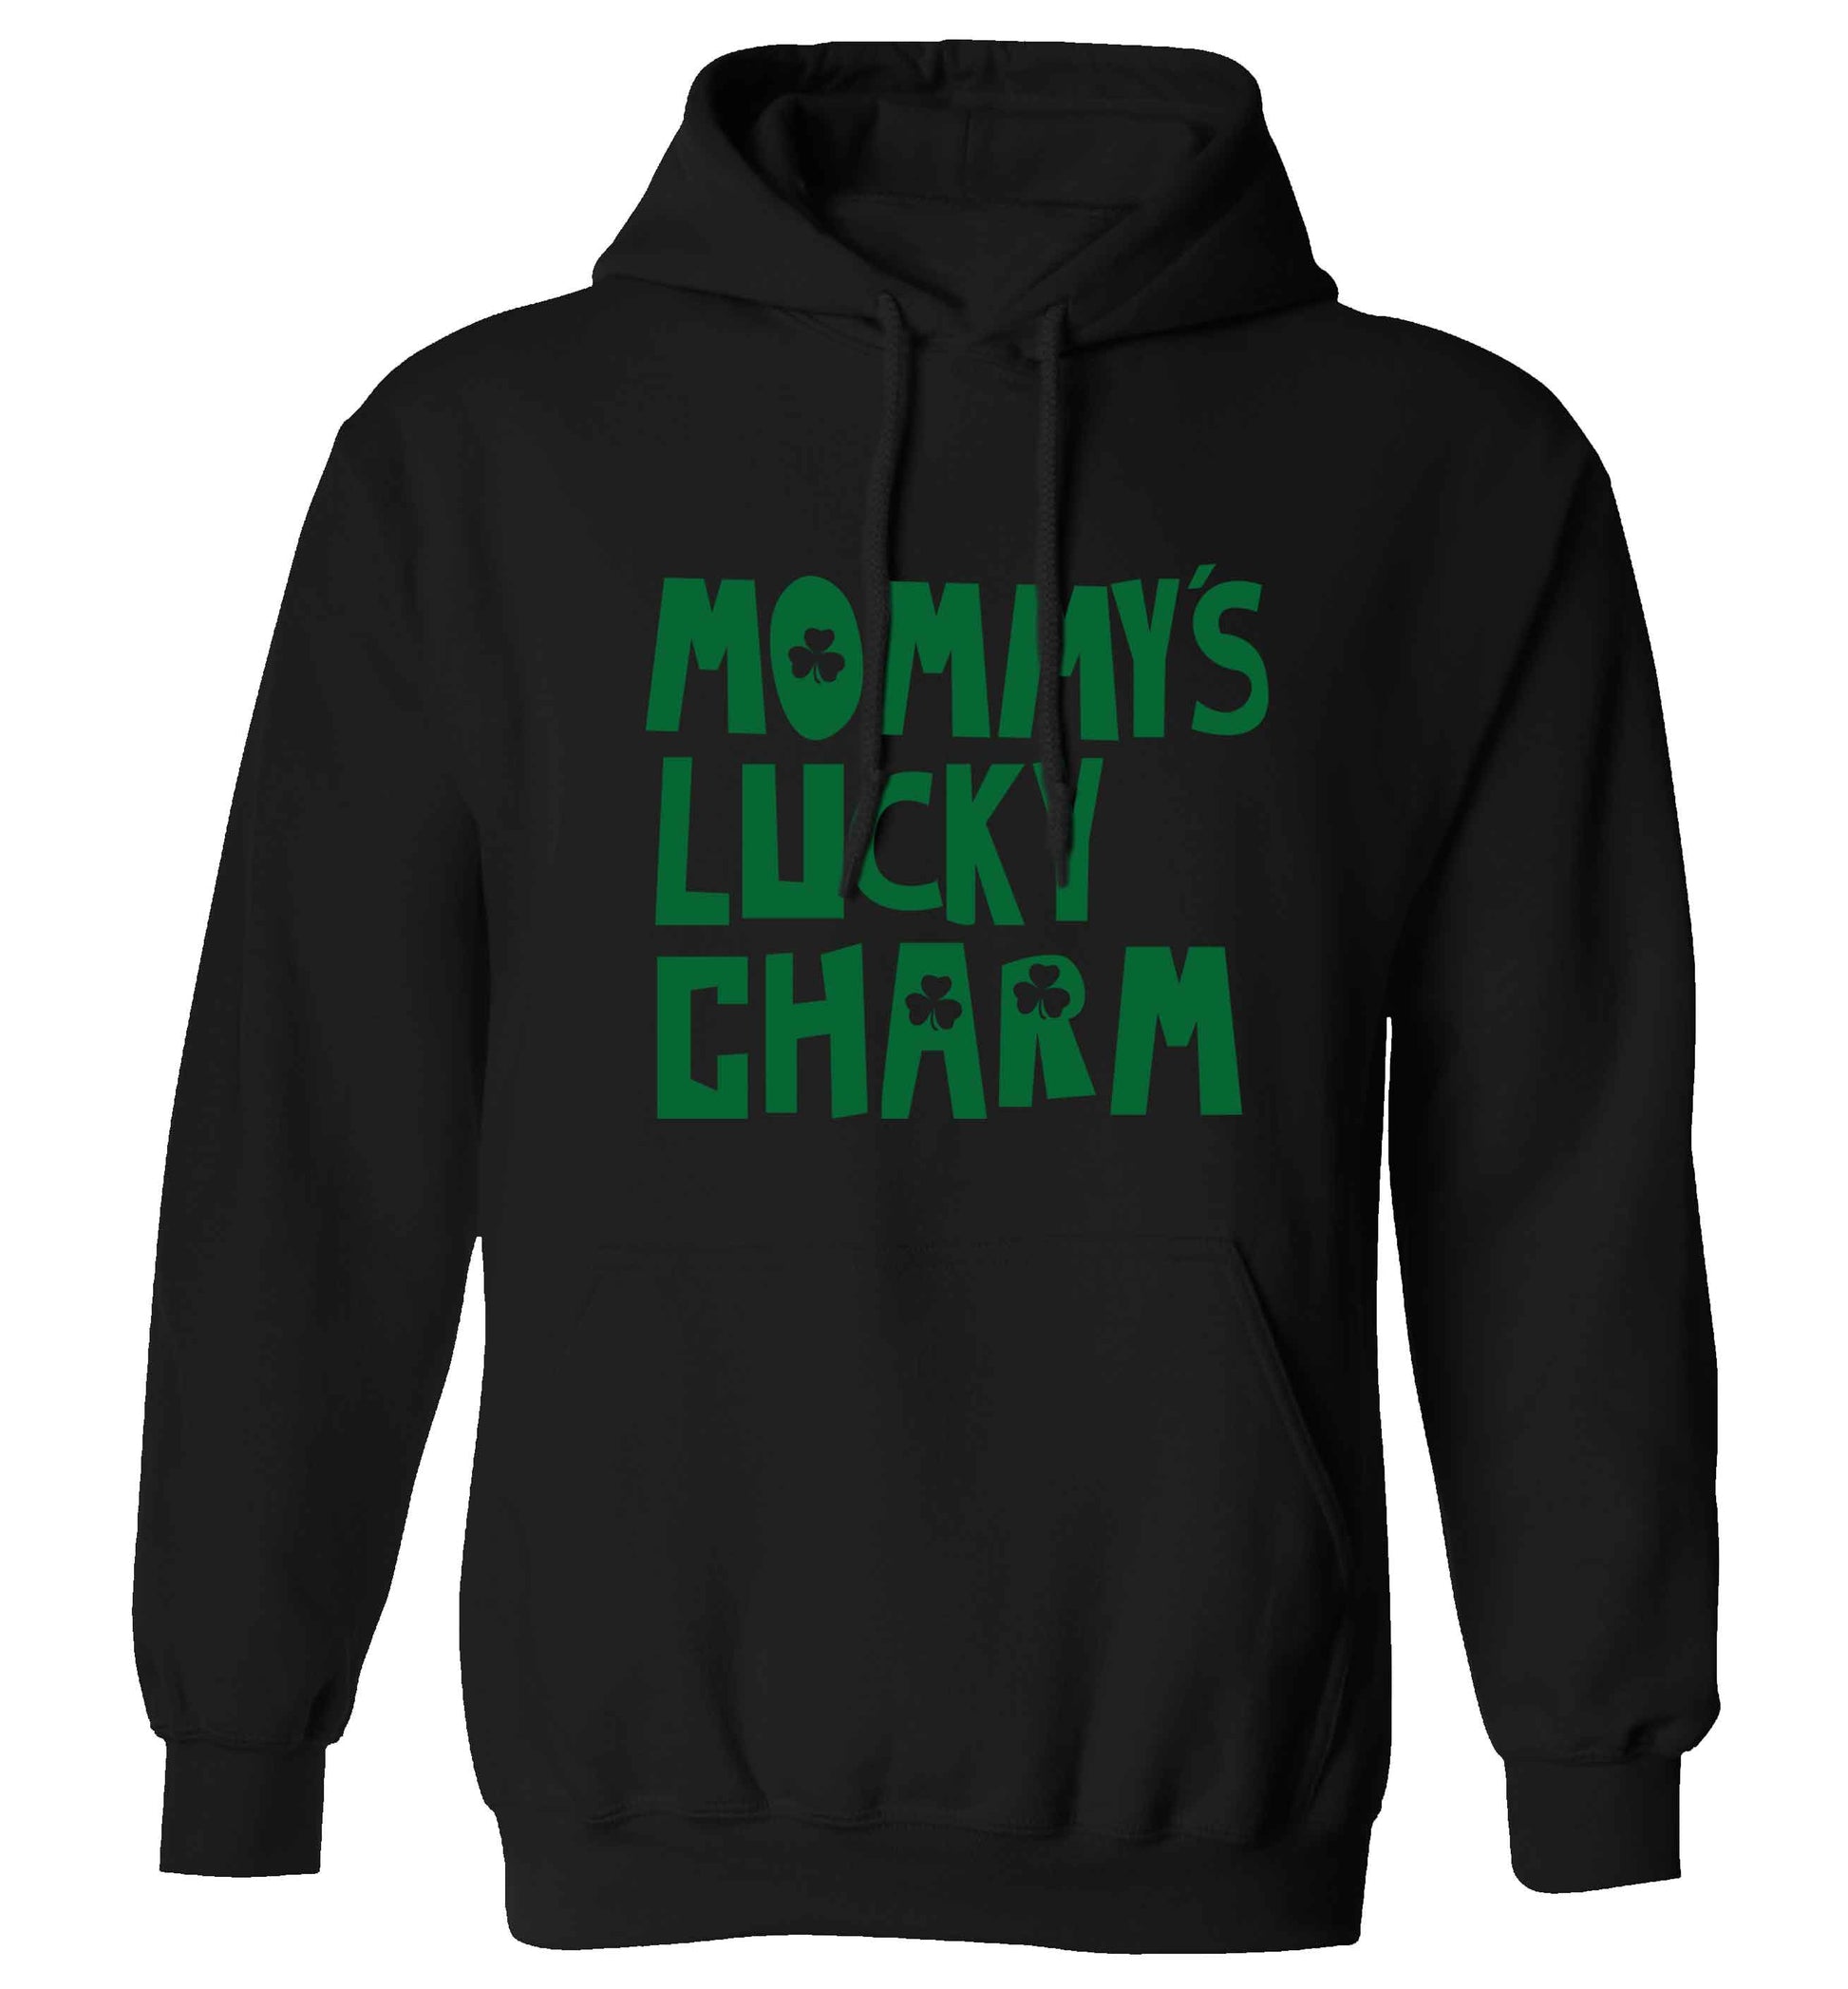 Mommy's lucky charm adults unisex black hoodie 2XL